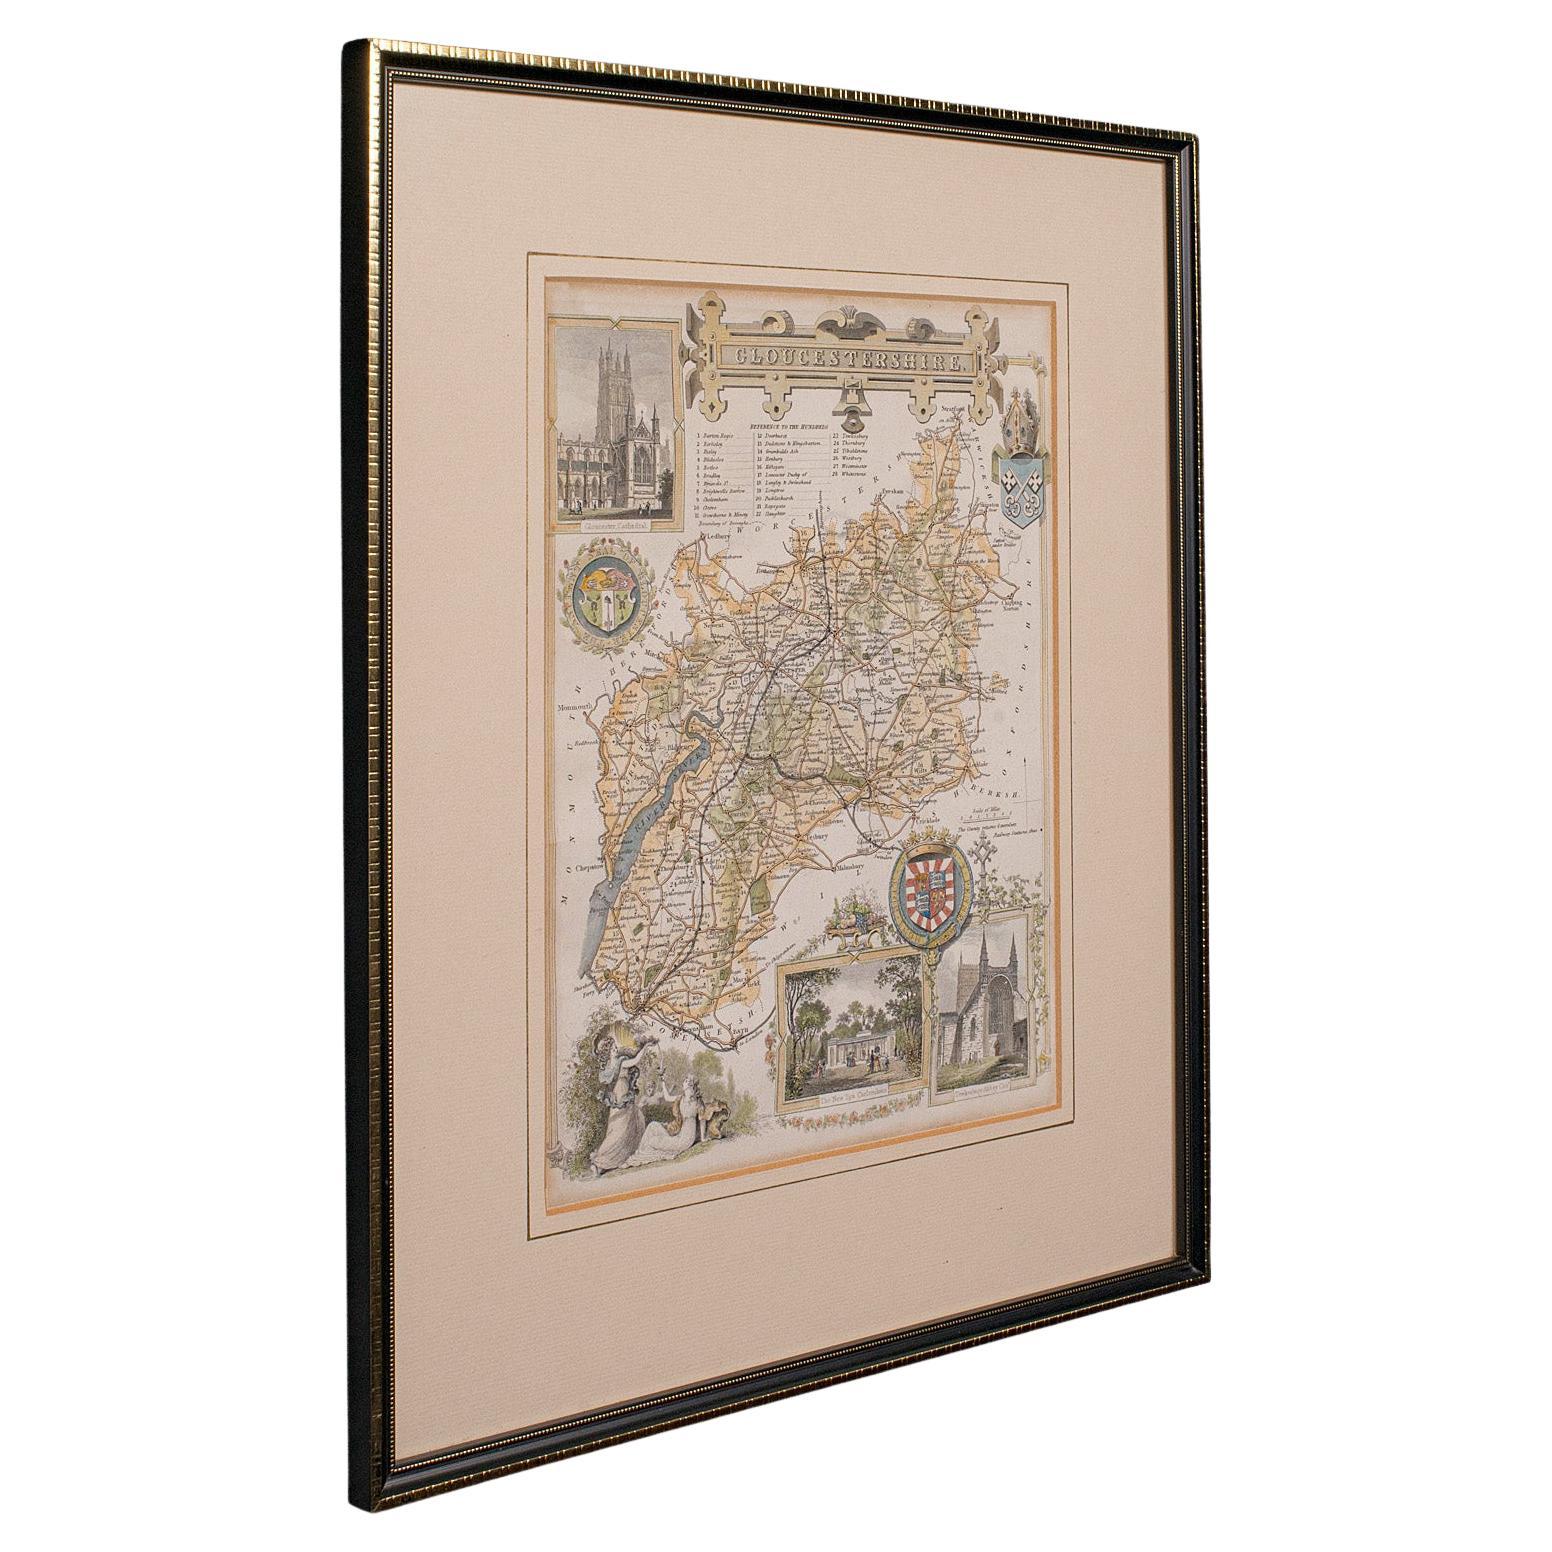 Antique Lithography Map, Gloucestershire, English, Framed Engraving, Cartography For Sale